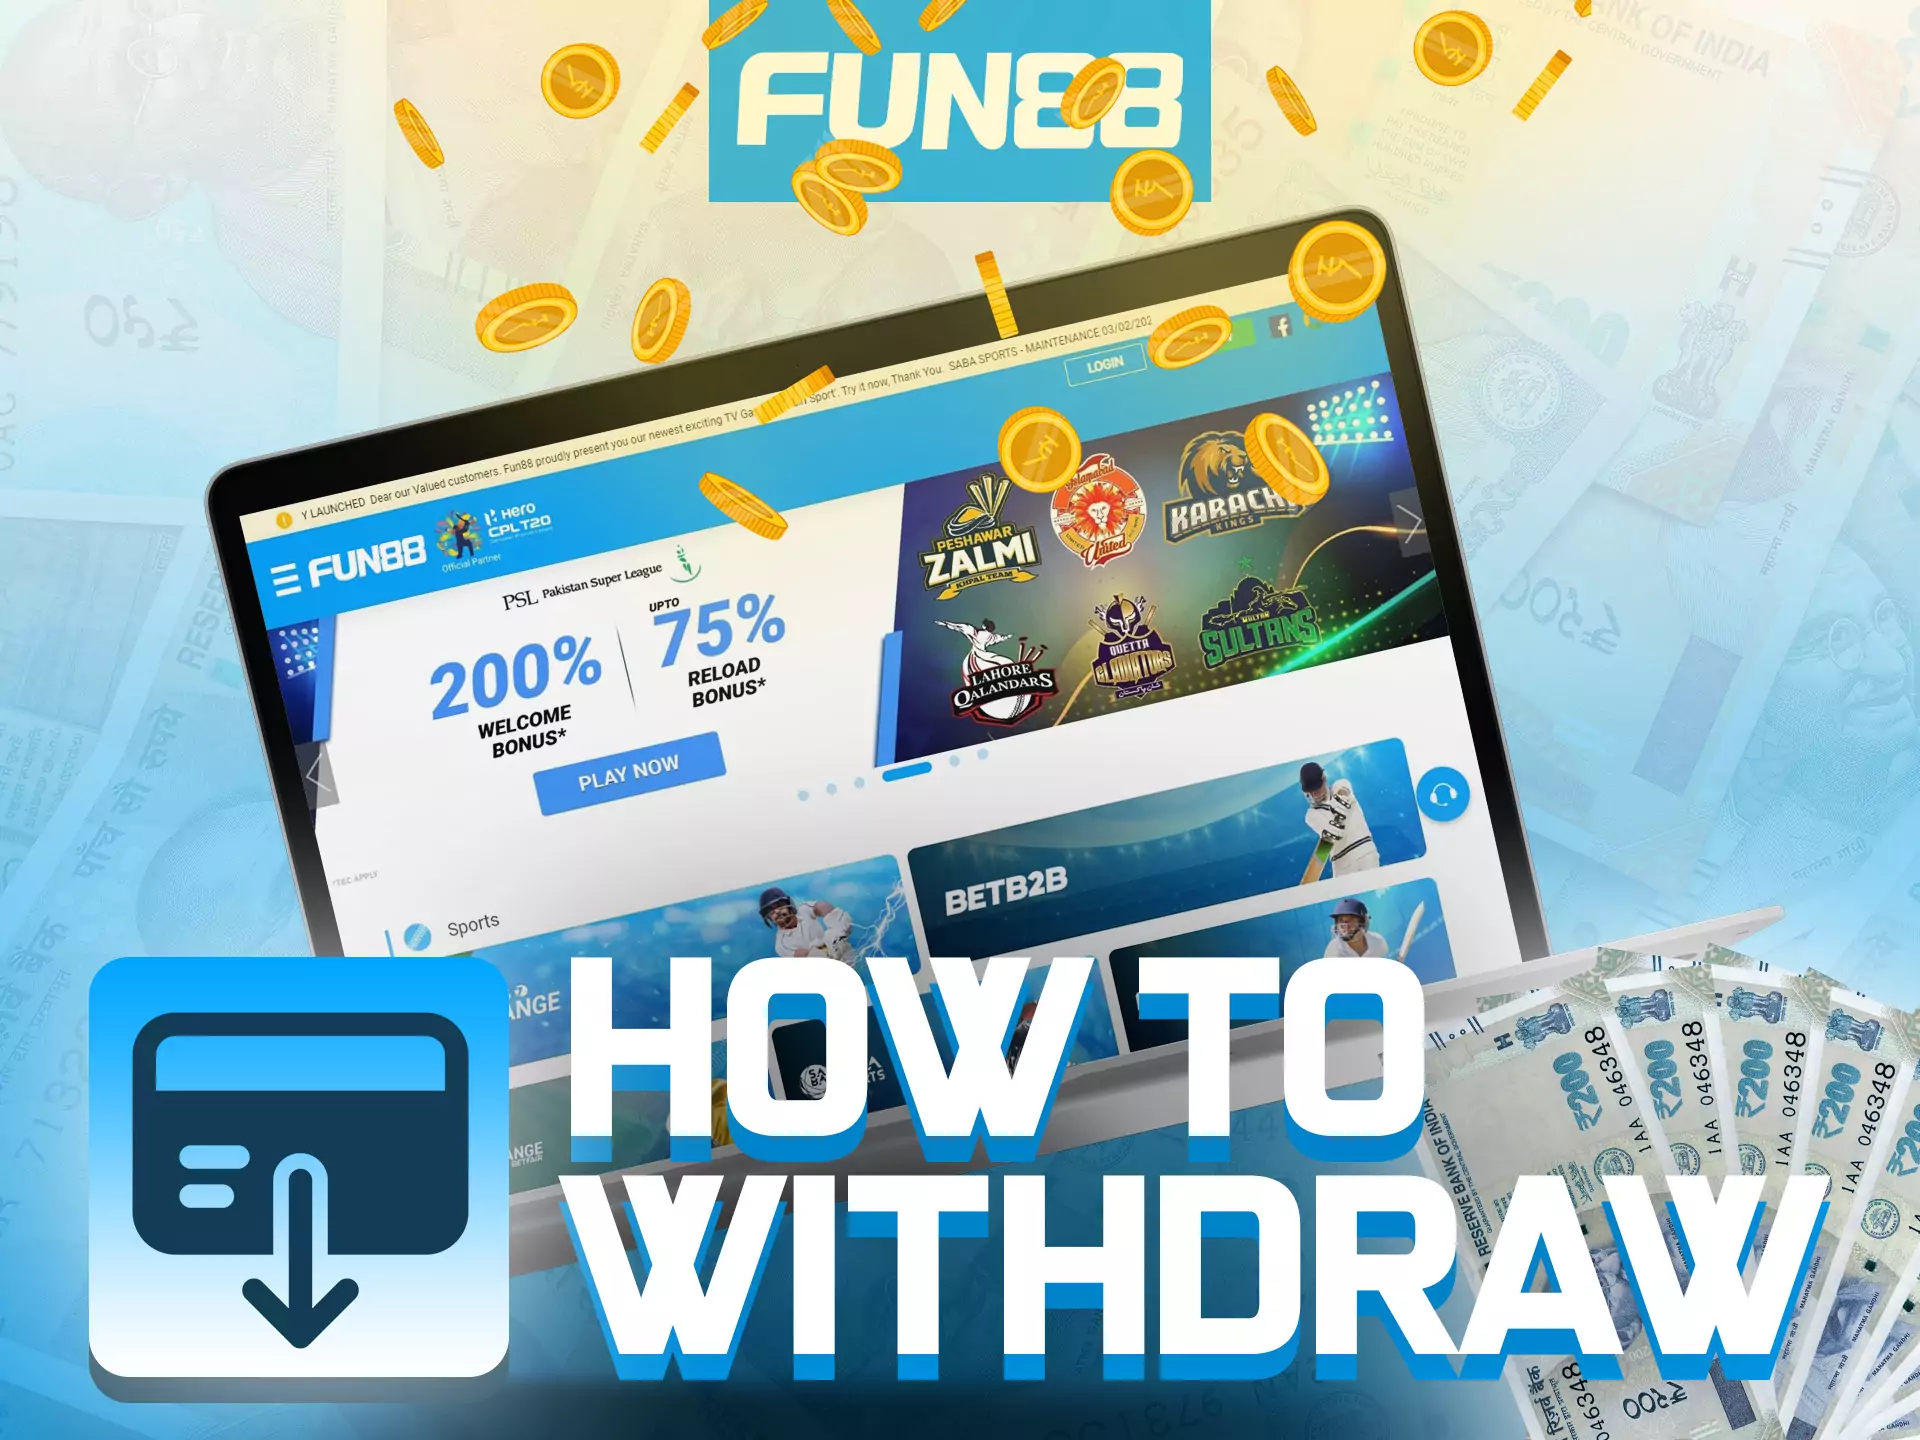 Learn how easy it is to withdraw your winnings with Fun88.